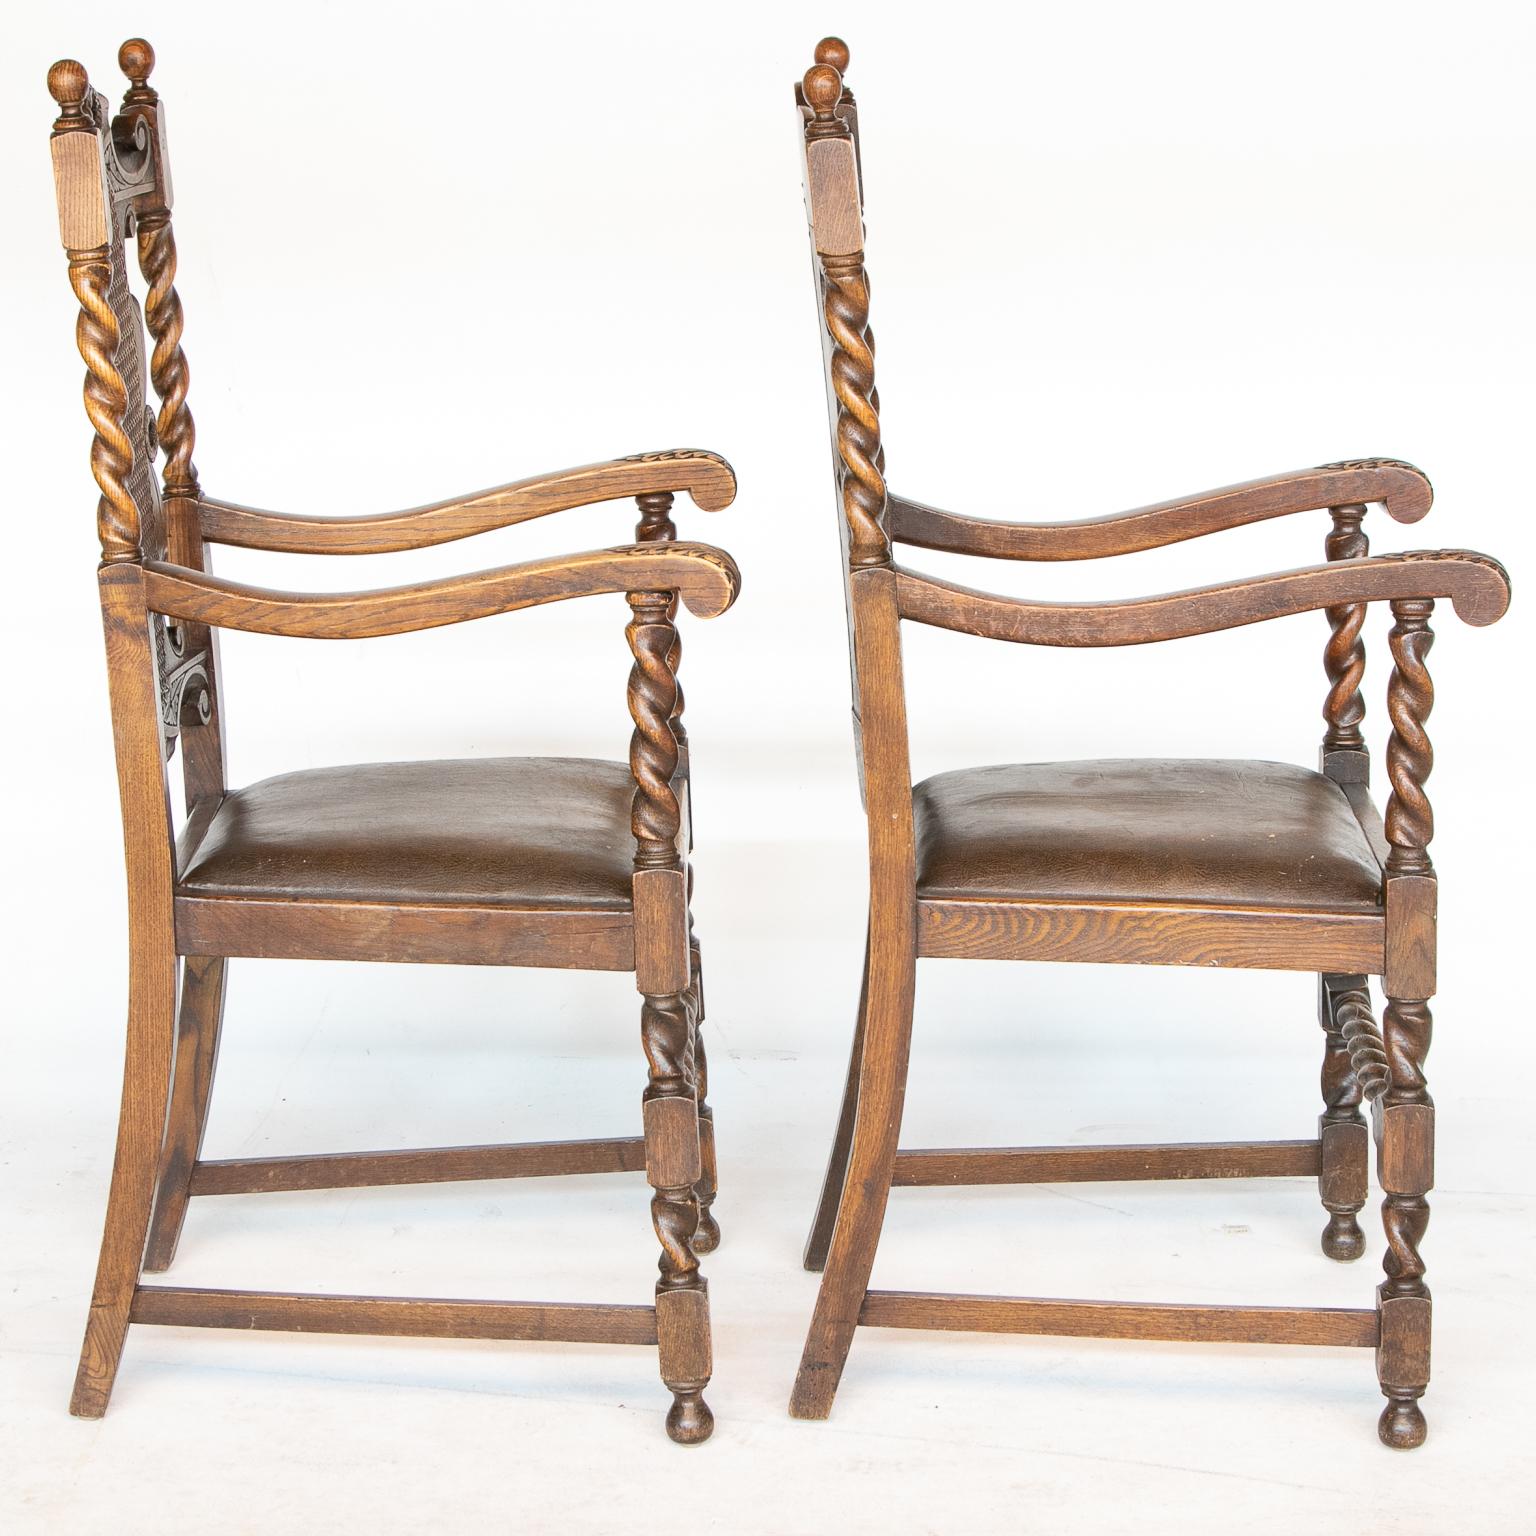 Pair of 19th C. Barley Twist armchairs
Pair of 19th C. Barley Twist armchairs with cane back and leather seats. When looking at this pair of armchairs first notice the quality of the turnings but also notice the choice of wood features. The